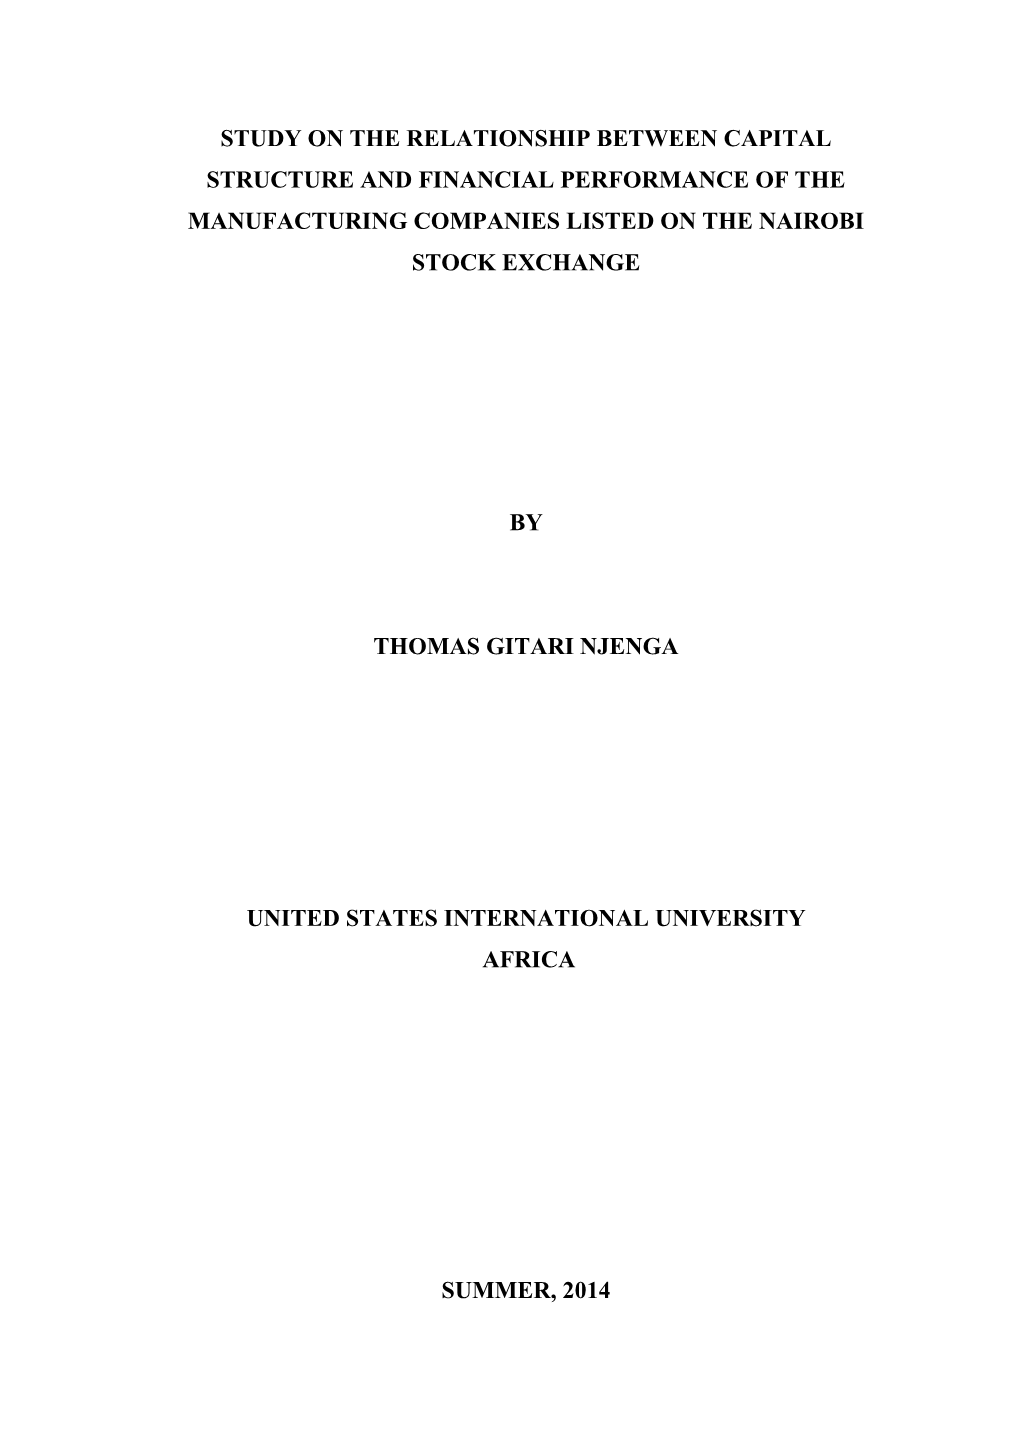 Study on the Relationship Between Capital Structure and Financial Performance of the Manufacturing Companies Listed on the Nairobi Stock Exchange